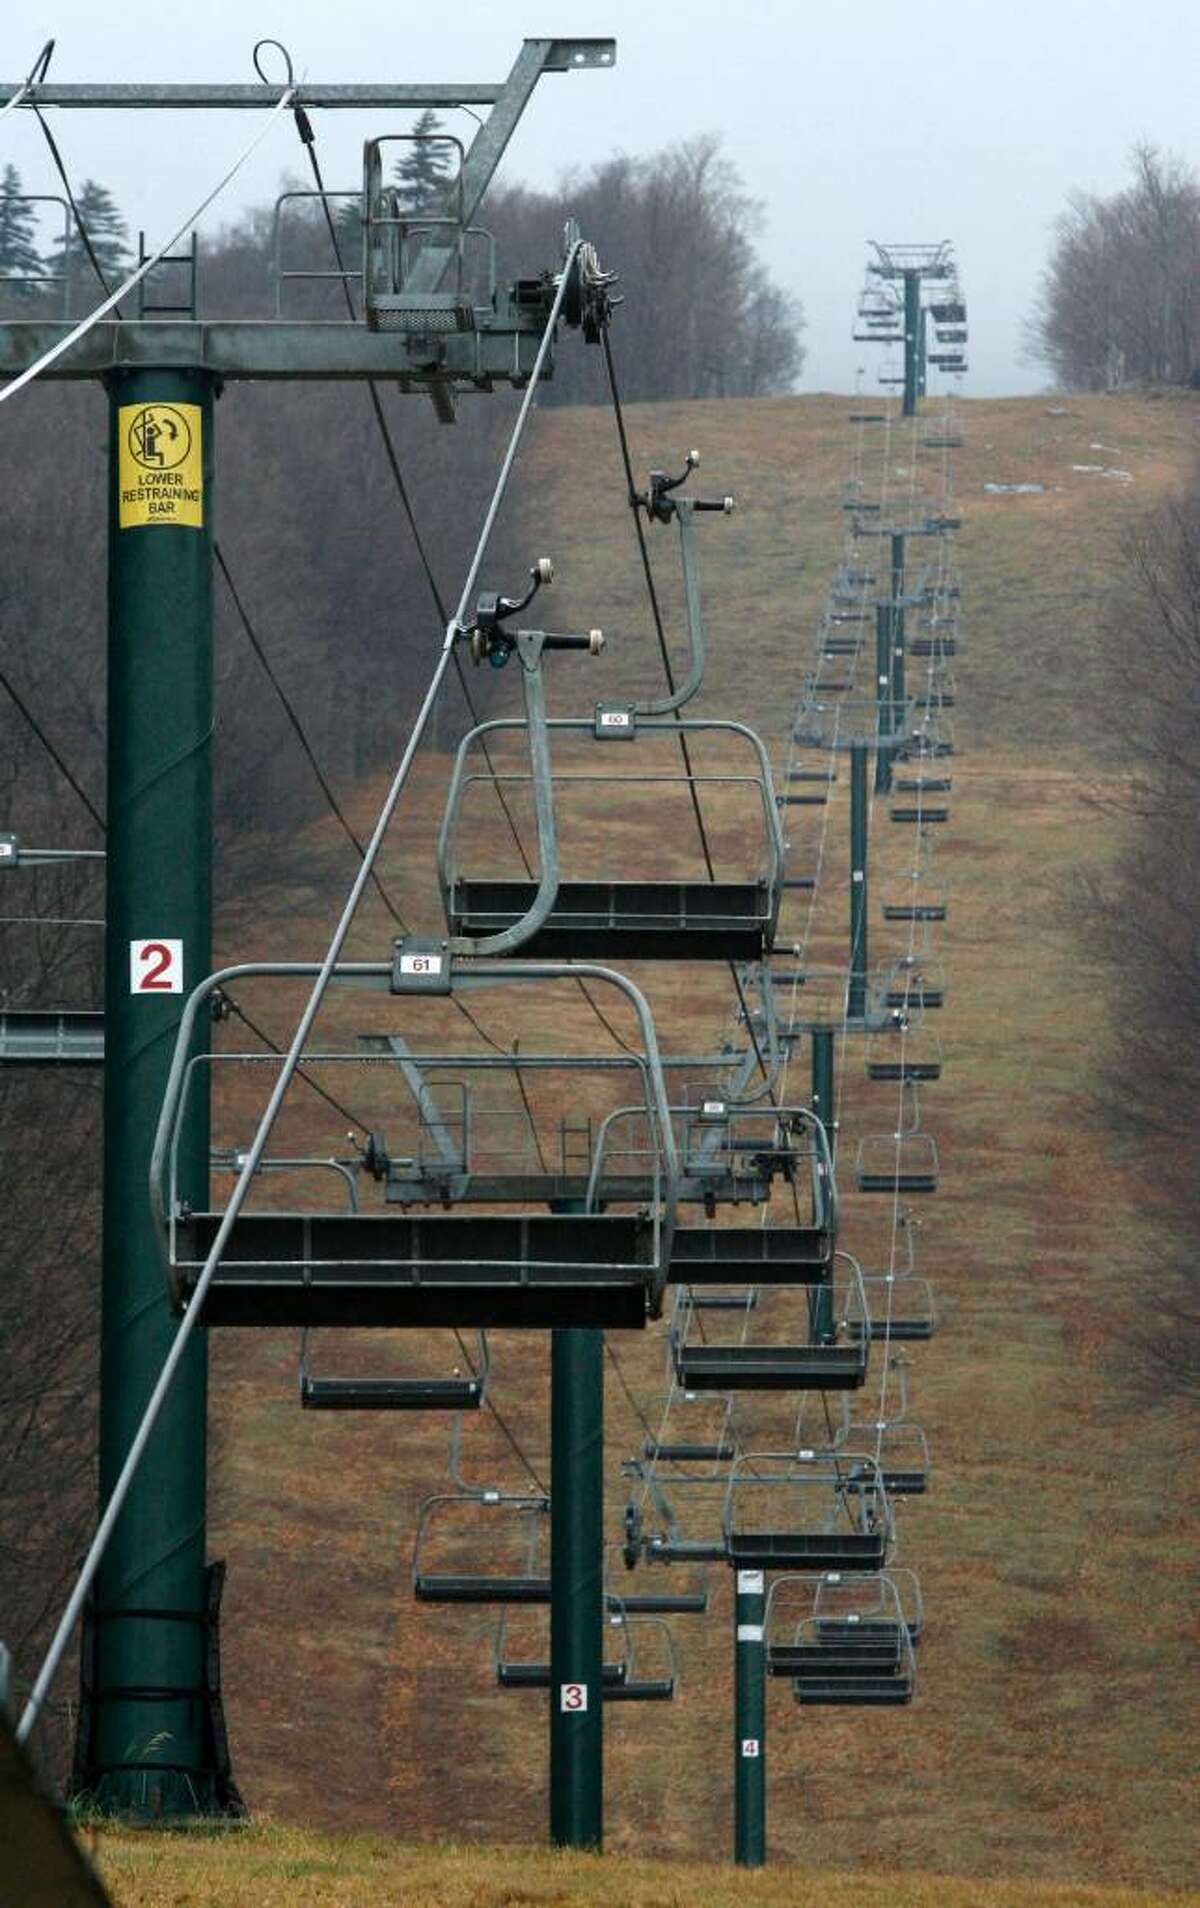 Ski lifts are silent and the slopes are bare at the Sugarbush ski resort in Warren, Vt., Friday, Nov. 27, 2009. Many Vermont ski areas have been closed for the Thanksgiving holiday. Weather forecasters say a strong nor'easter storm is heading through New England on Friday, with the possibility of leaving behind some high-elevation snow for Vermont's ski slopes.(AP Photo/Toby Talbot)